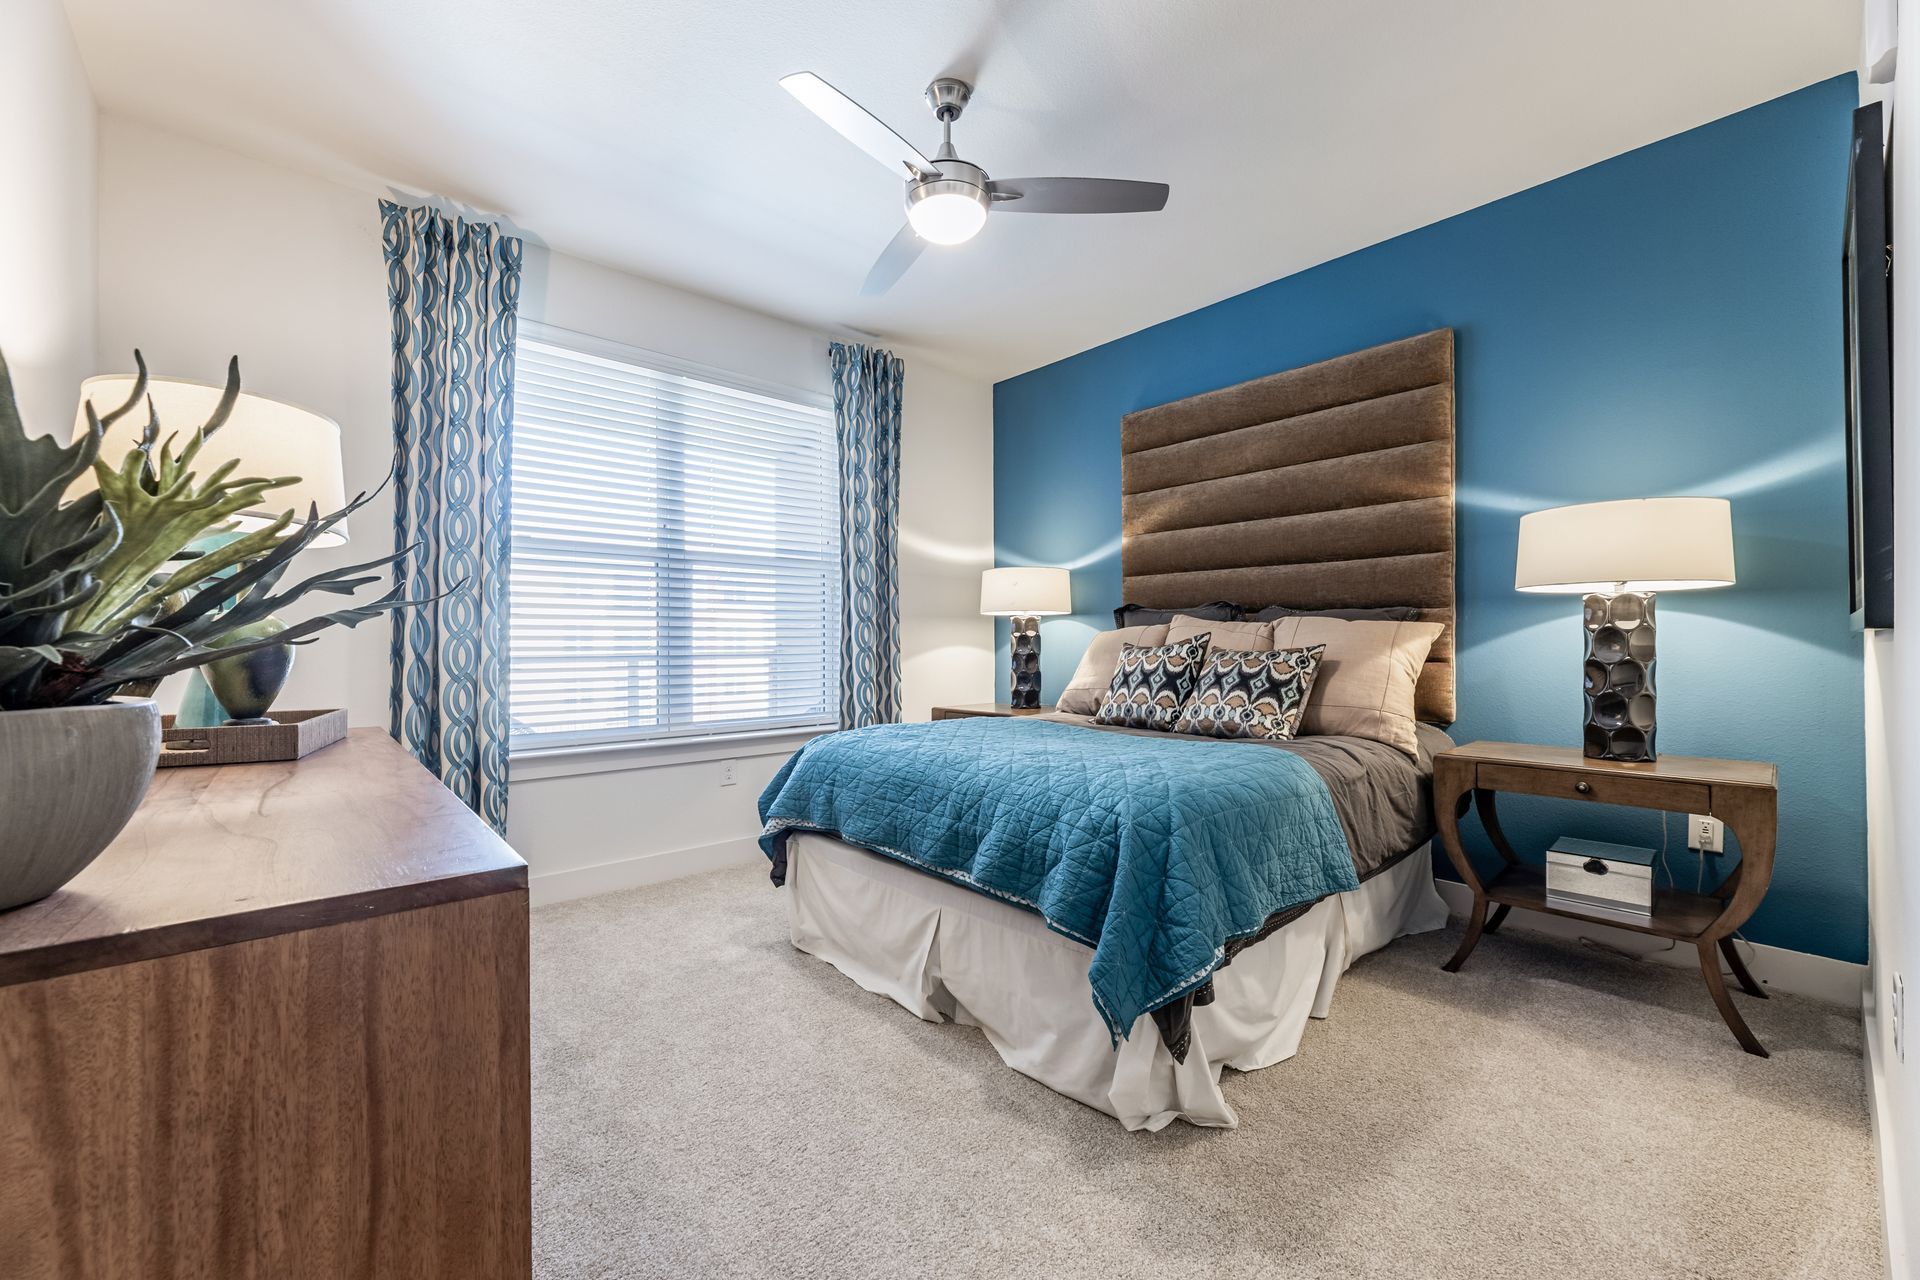 A bedroom with a bed, nightstand, lamps, and a ceiling fan at Parkside at Craig Ranch.